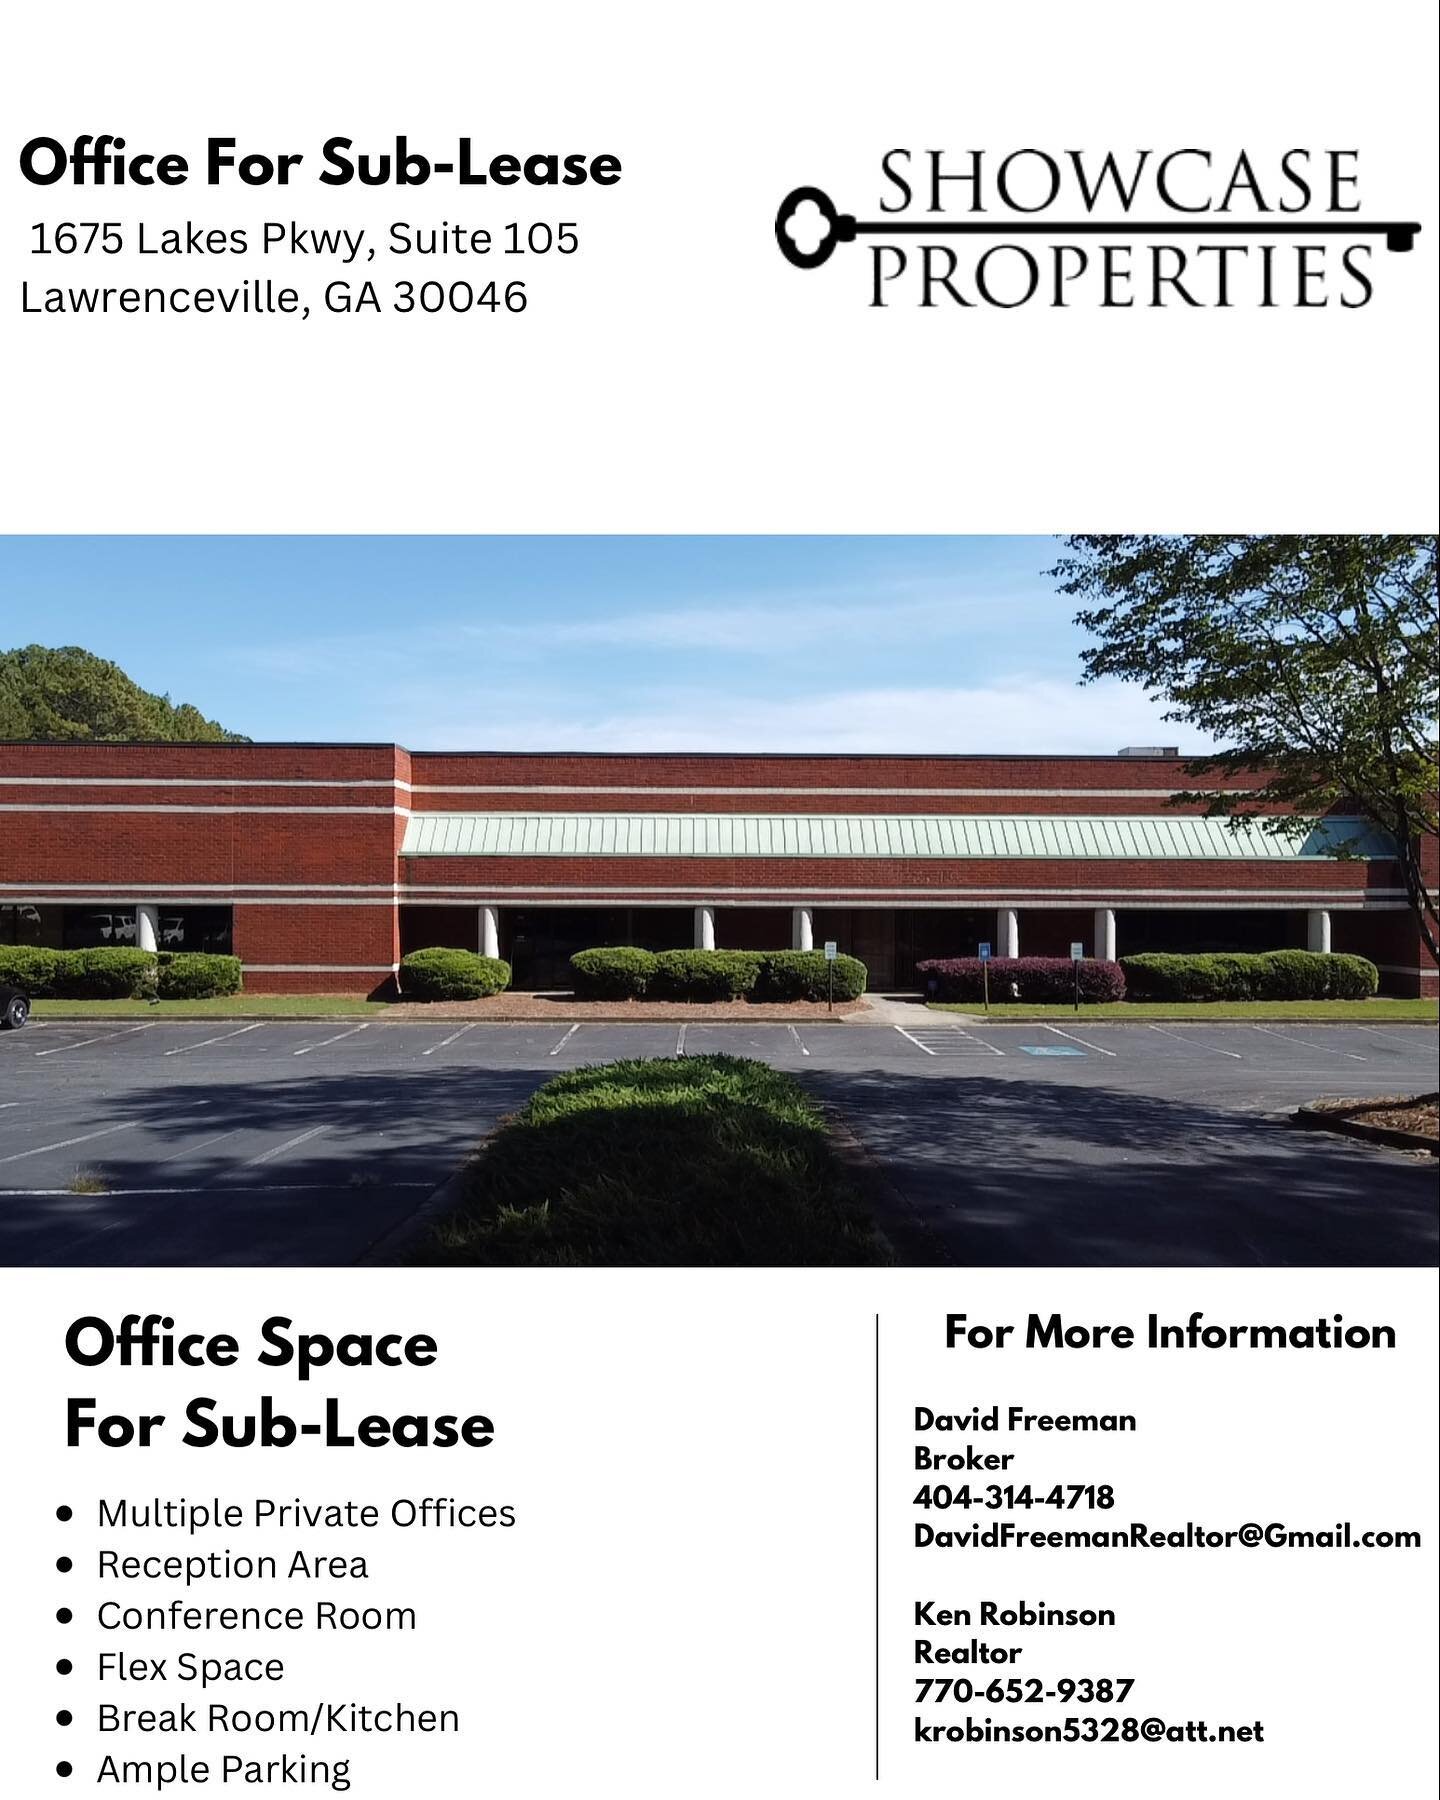 Sub-Lease available for immediate occupancy. Amazing layout with 3200 SqFt! Multiple private offices, conference room, bullpen area, break room/kitchen, lots of parking. Utilities included all for $3200/mo! Located in Lawrenceville with easy access t